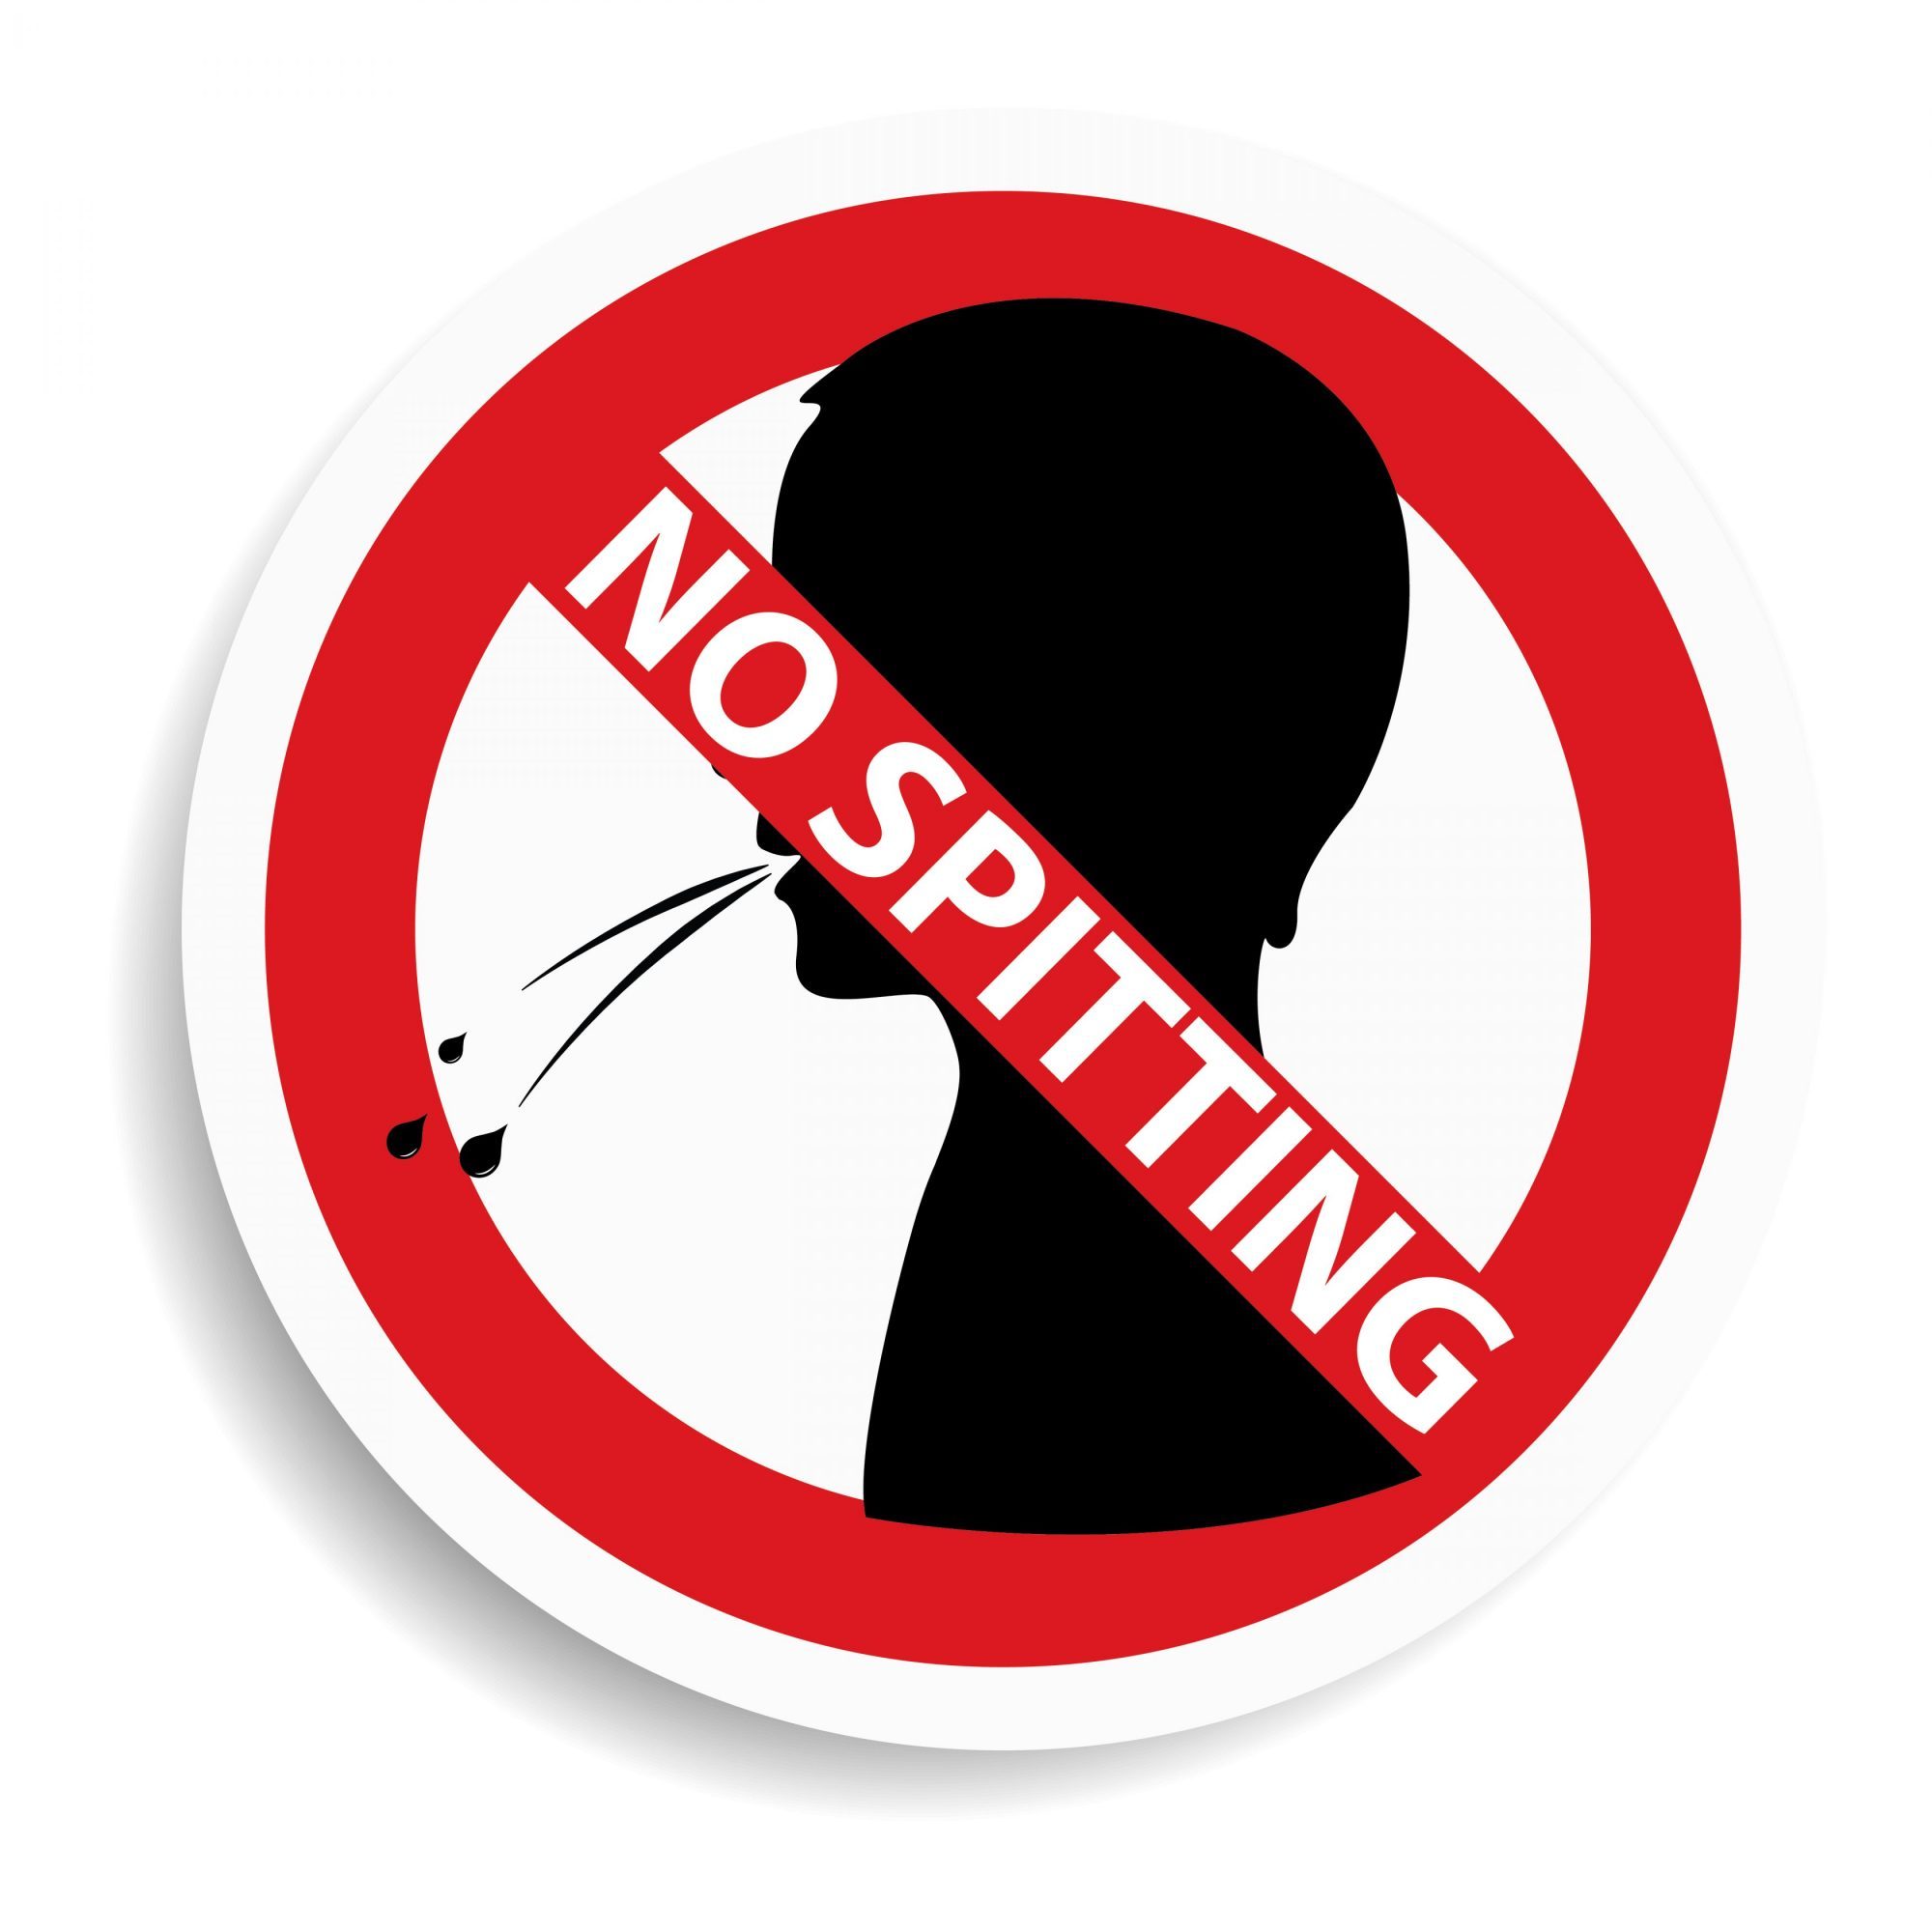 No spitting sign